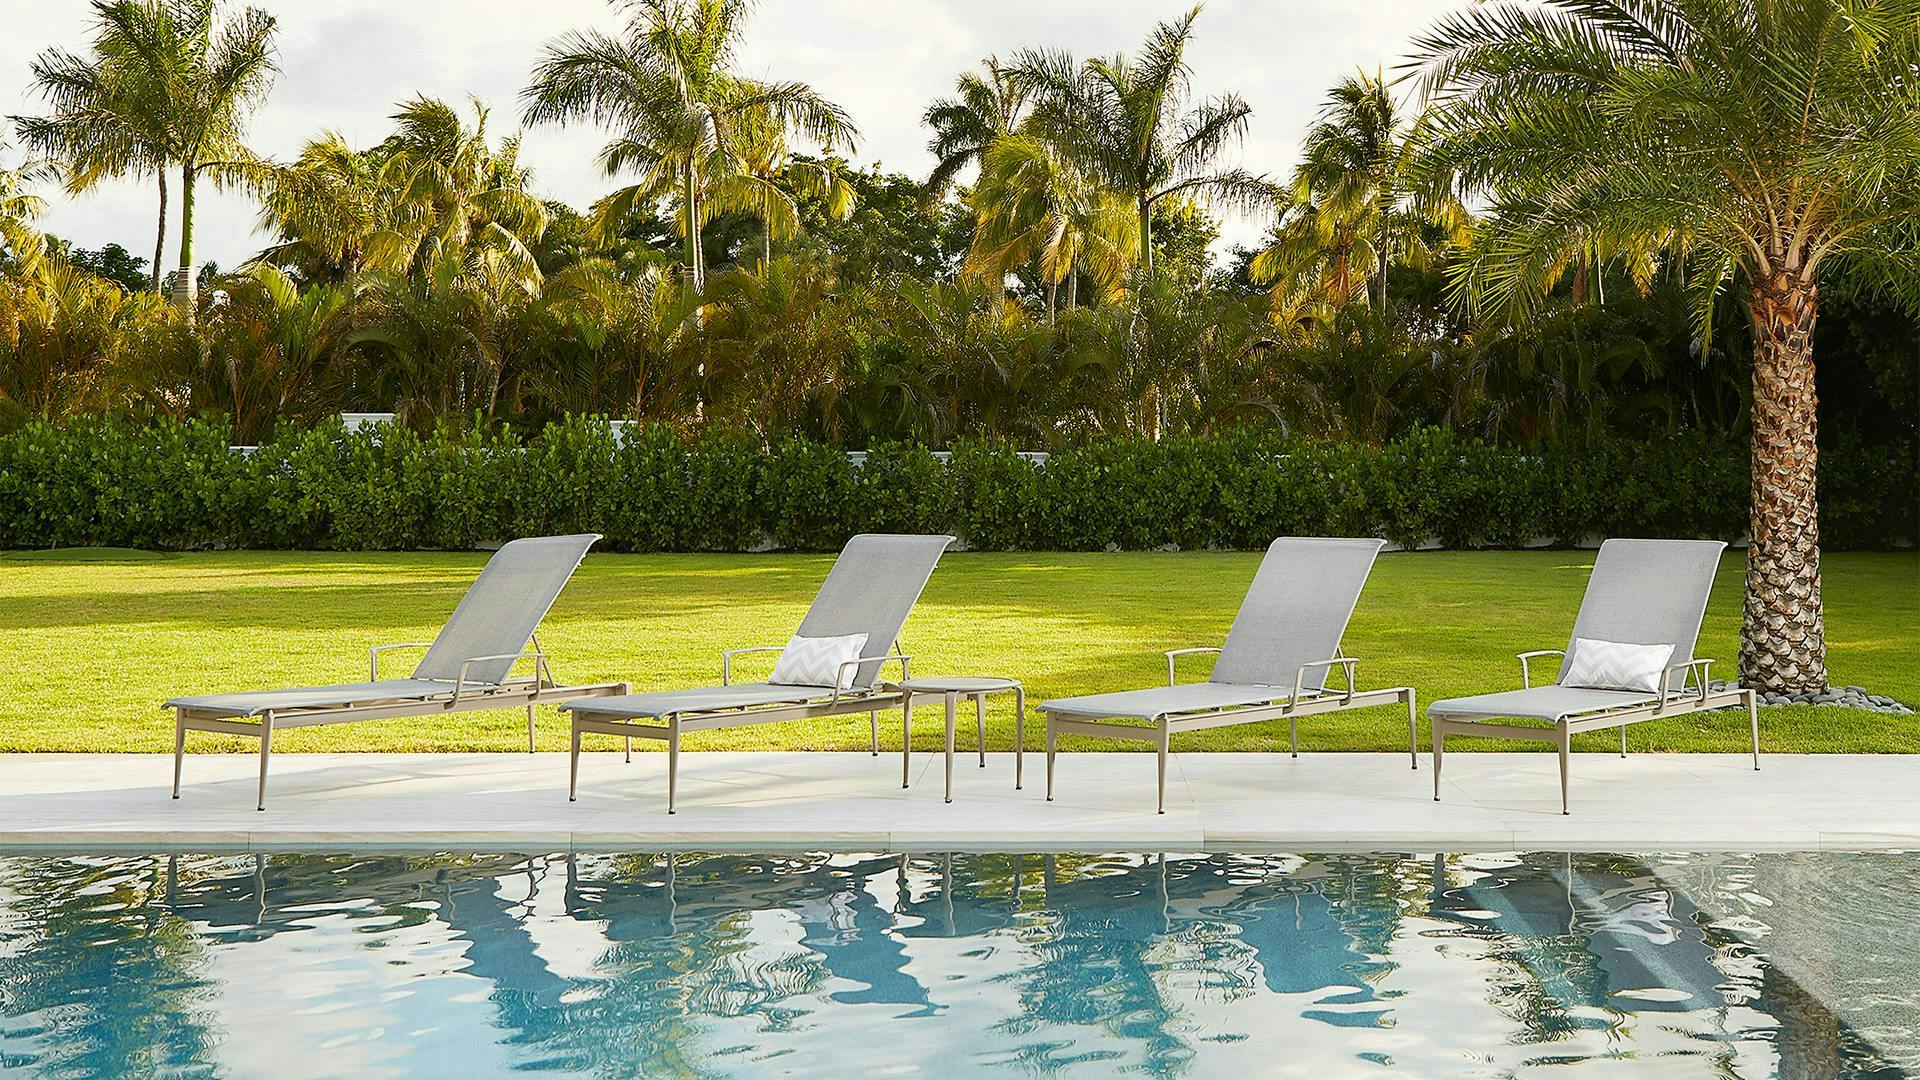 Flight Collection - Chaise lounge chairs next to a pool surrounded by palm trees.